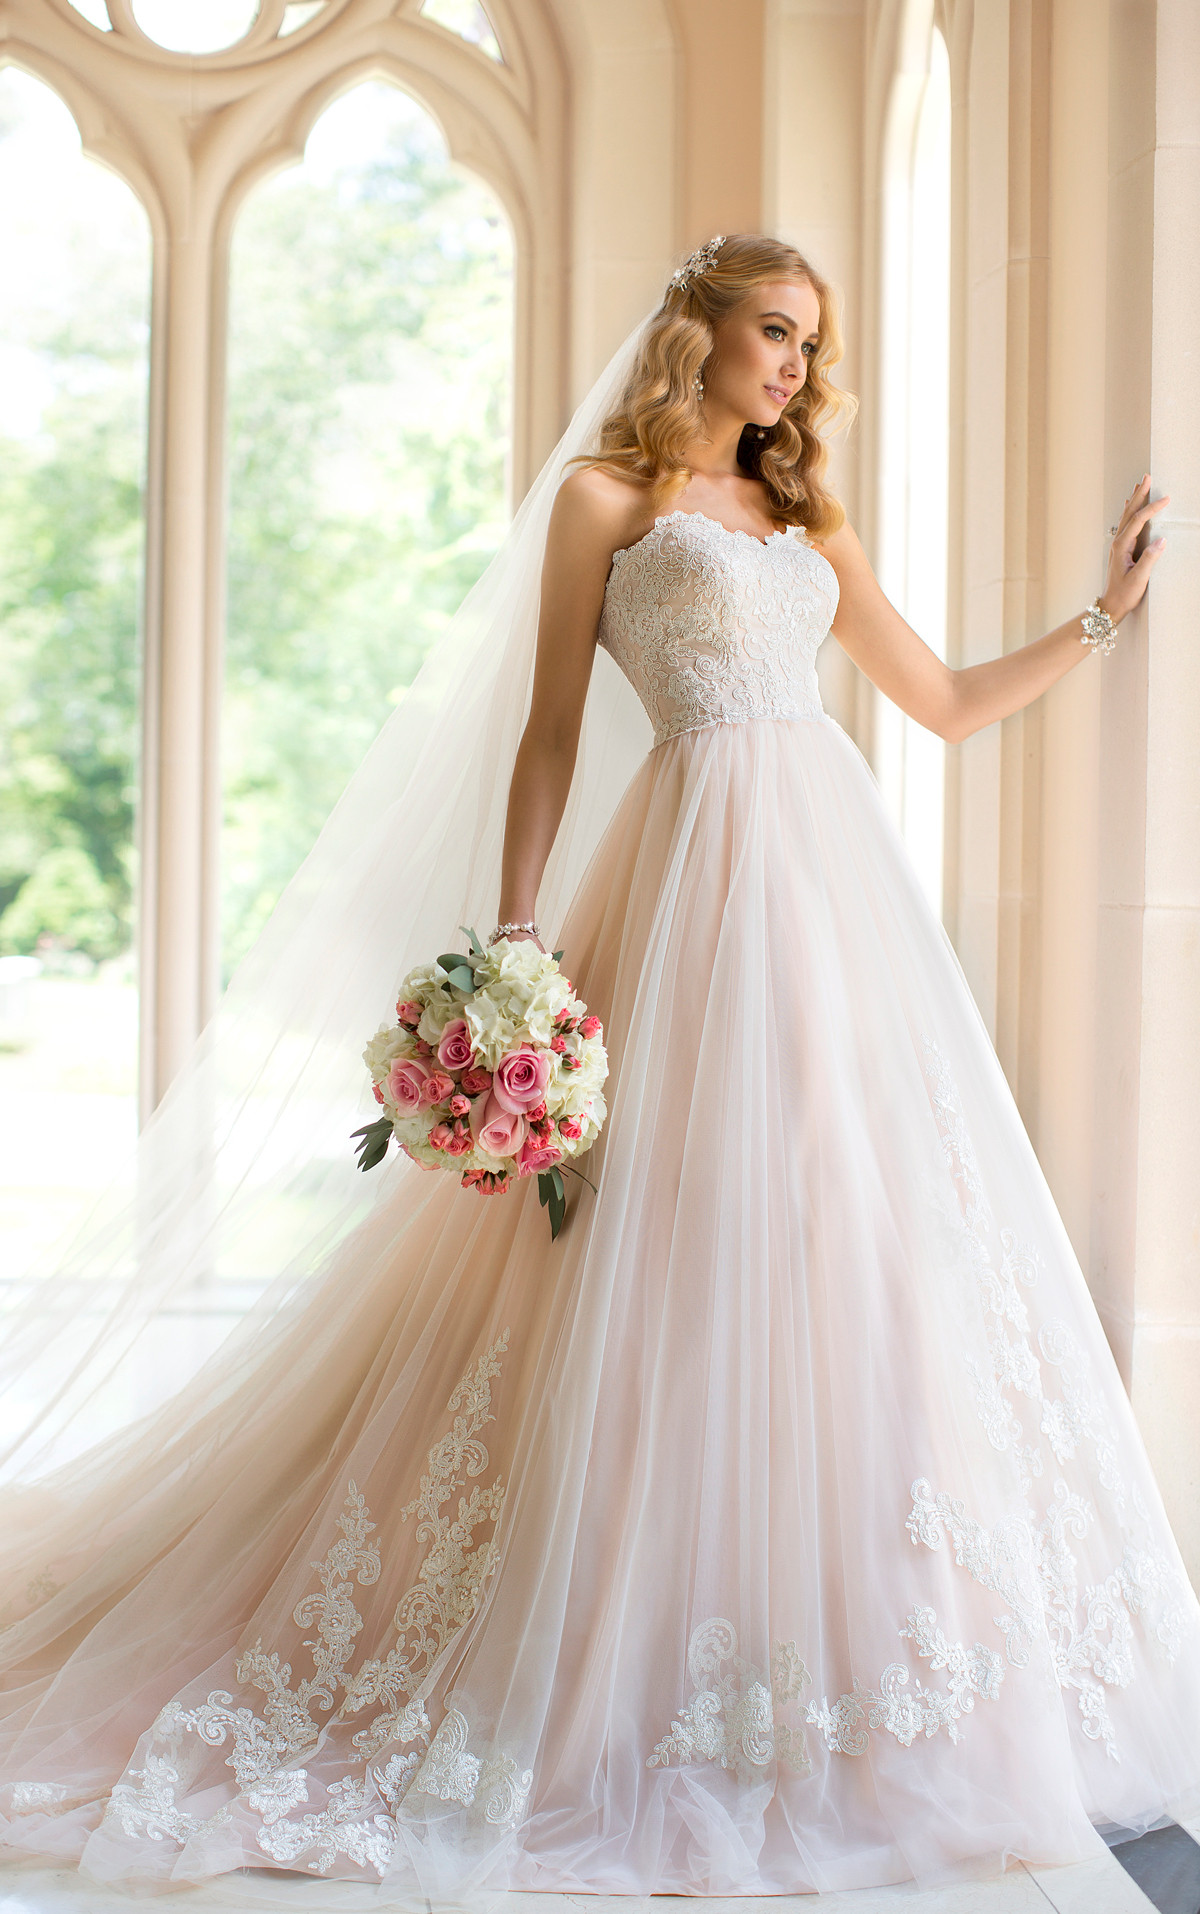 Designer Wedding Gown
 The Best Gowns from The Most In Demand Wedding Dress